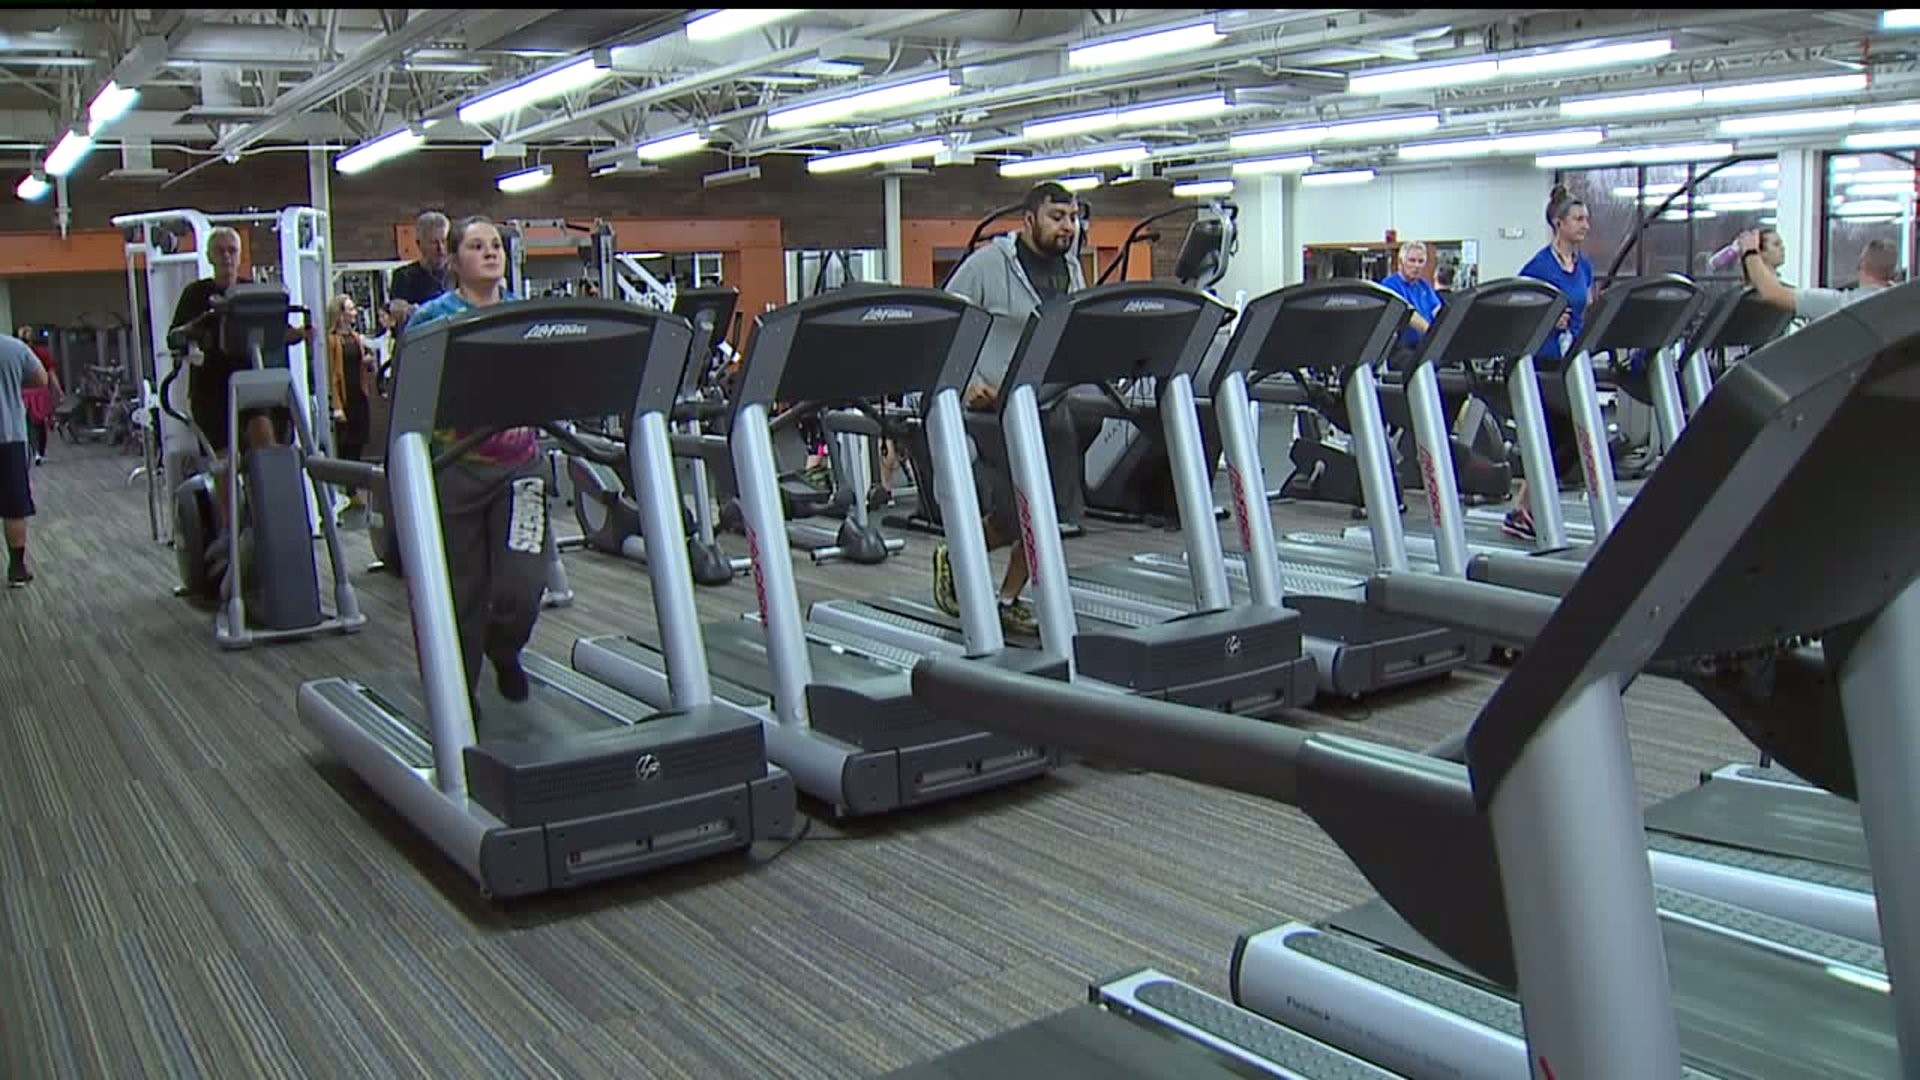 Let`s Move Quad Cities: Resolving to get healthier? Think big picture